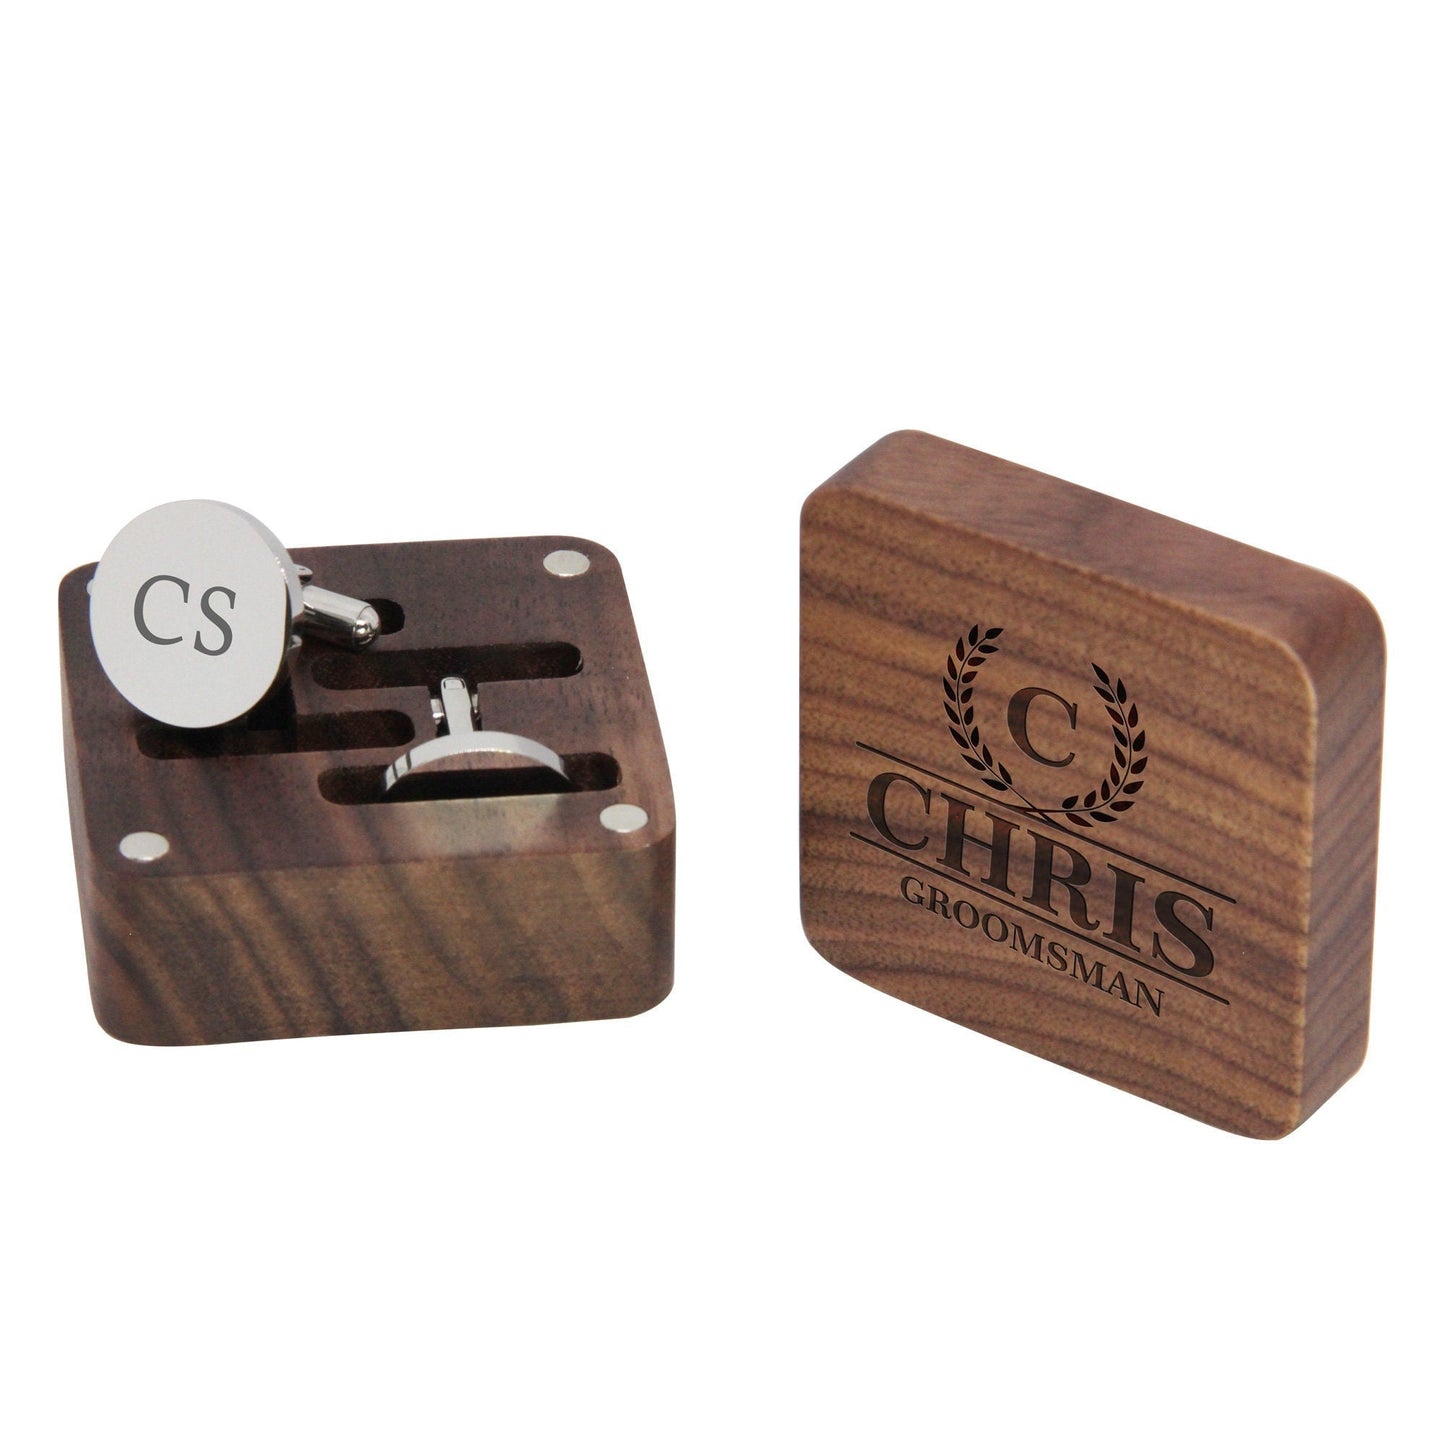 Personalised engraved stainless steel mens round cufflinks gift with wooden box | groom groomsman best man father husband wedding gift